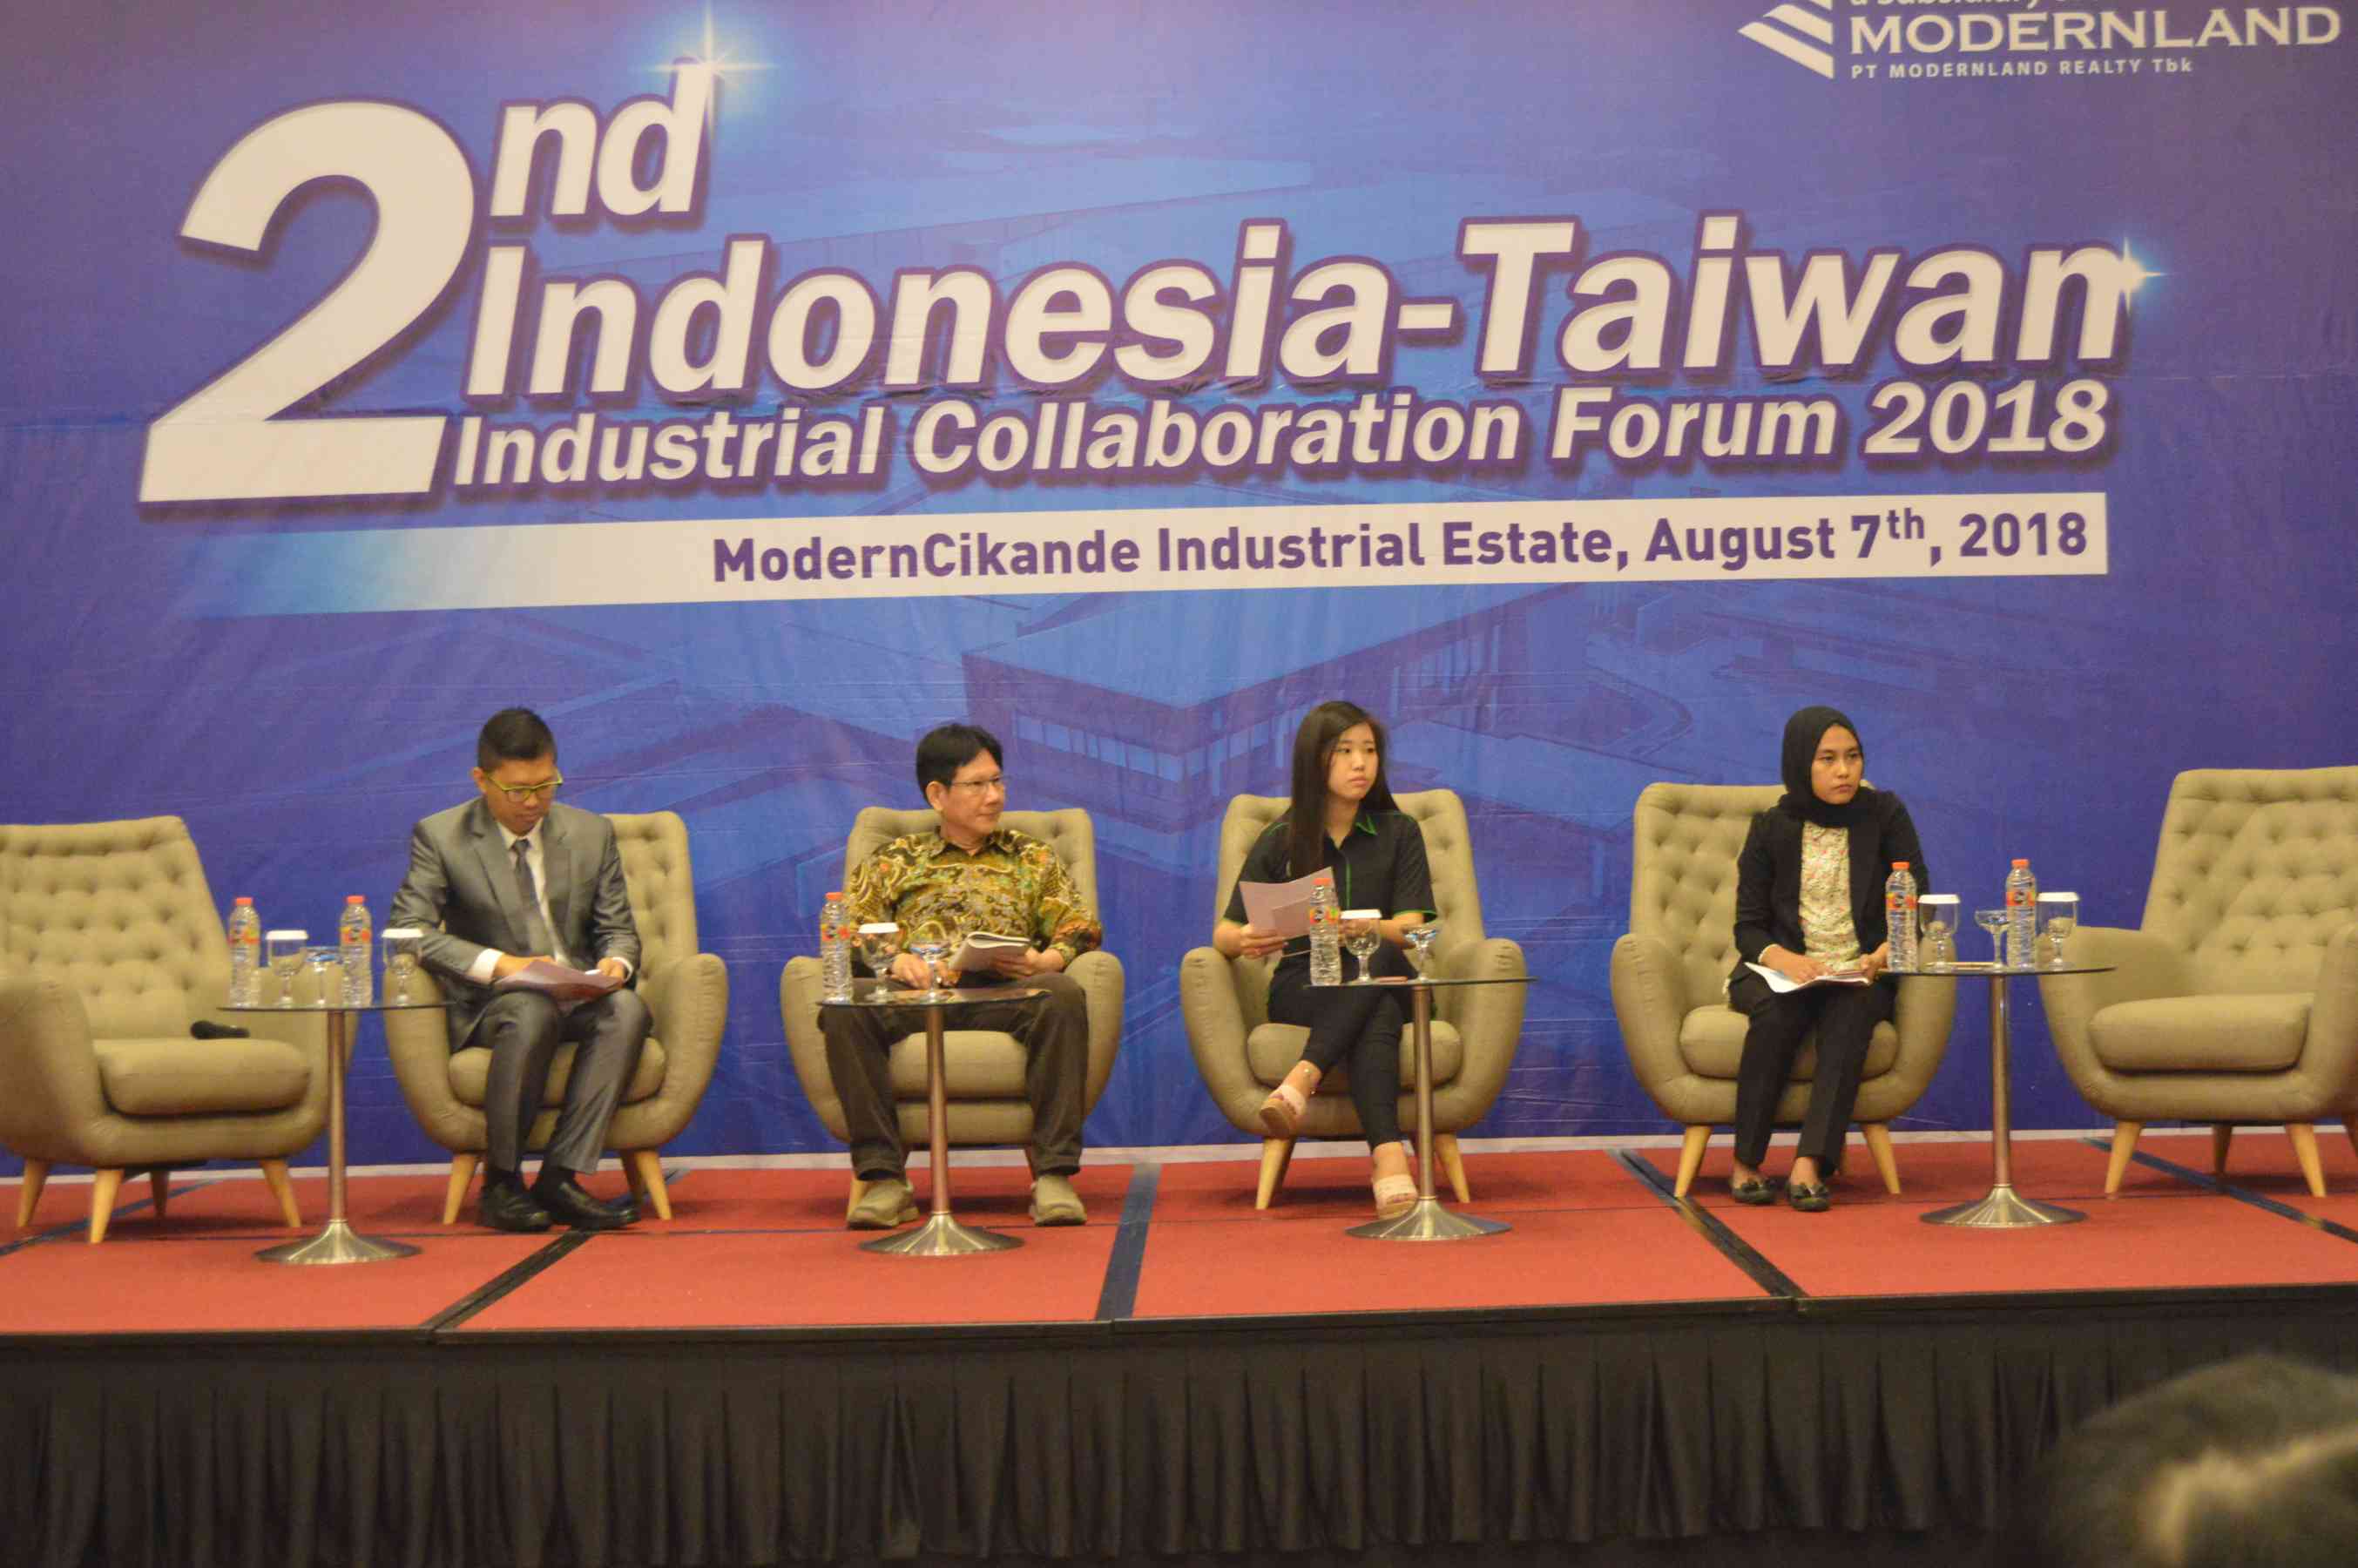 Indonesia Taiwan Industrial Collaboration 2018